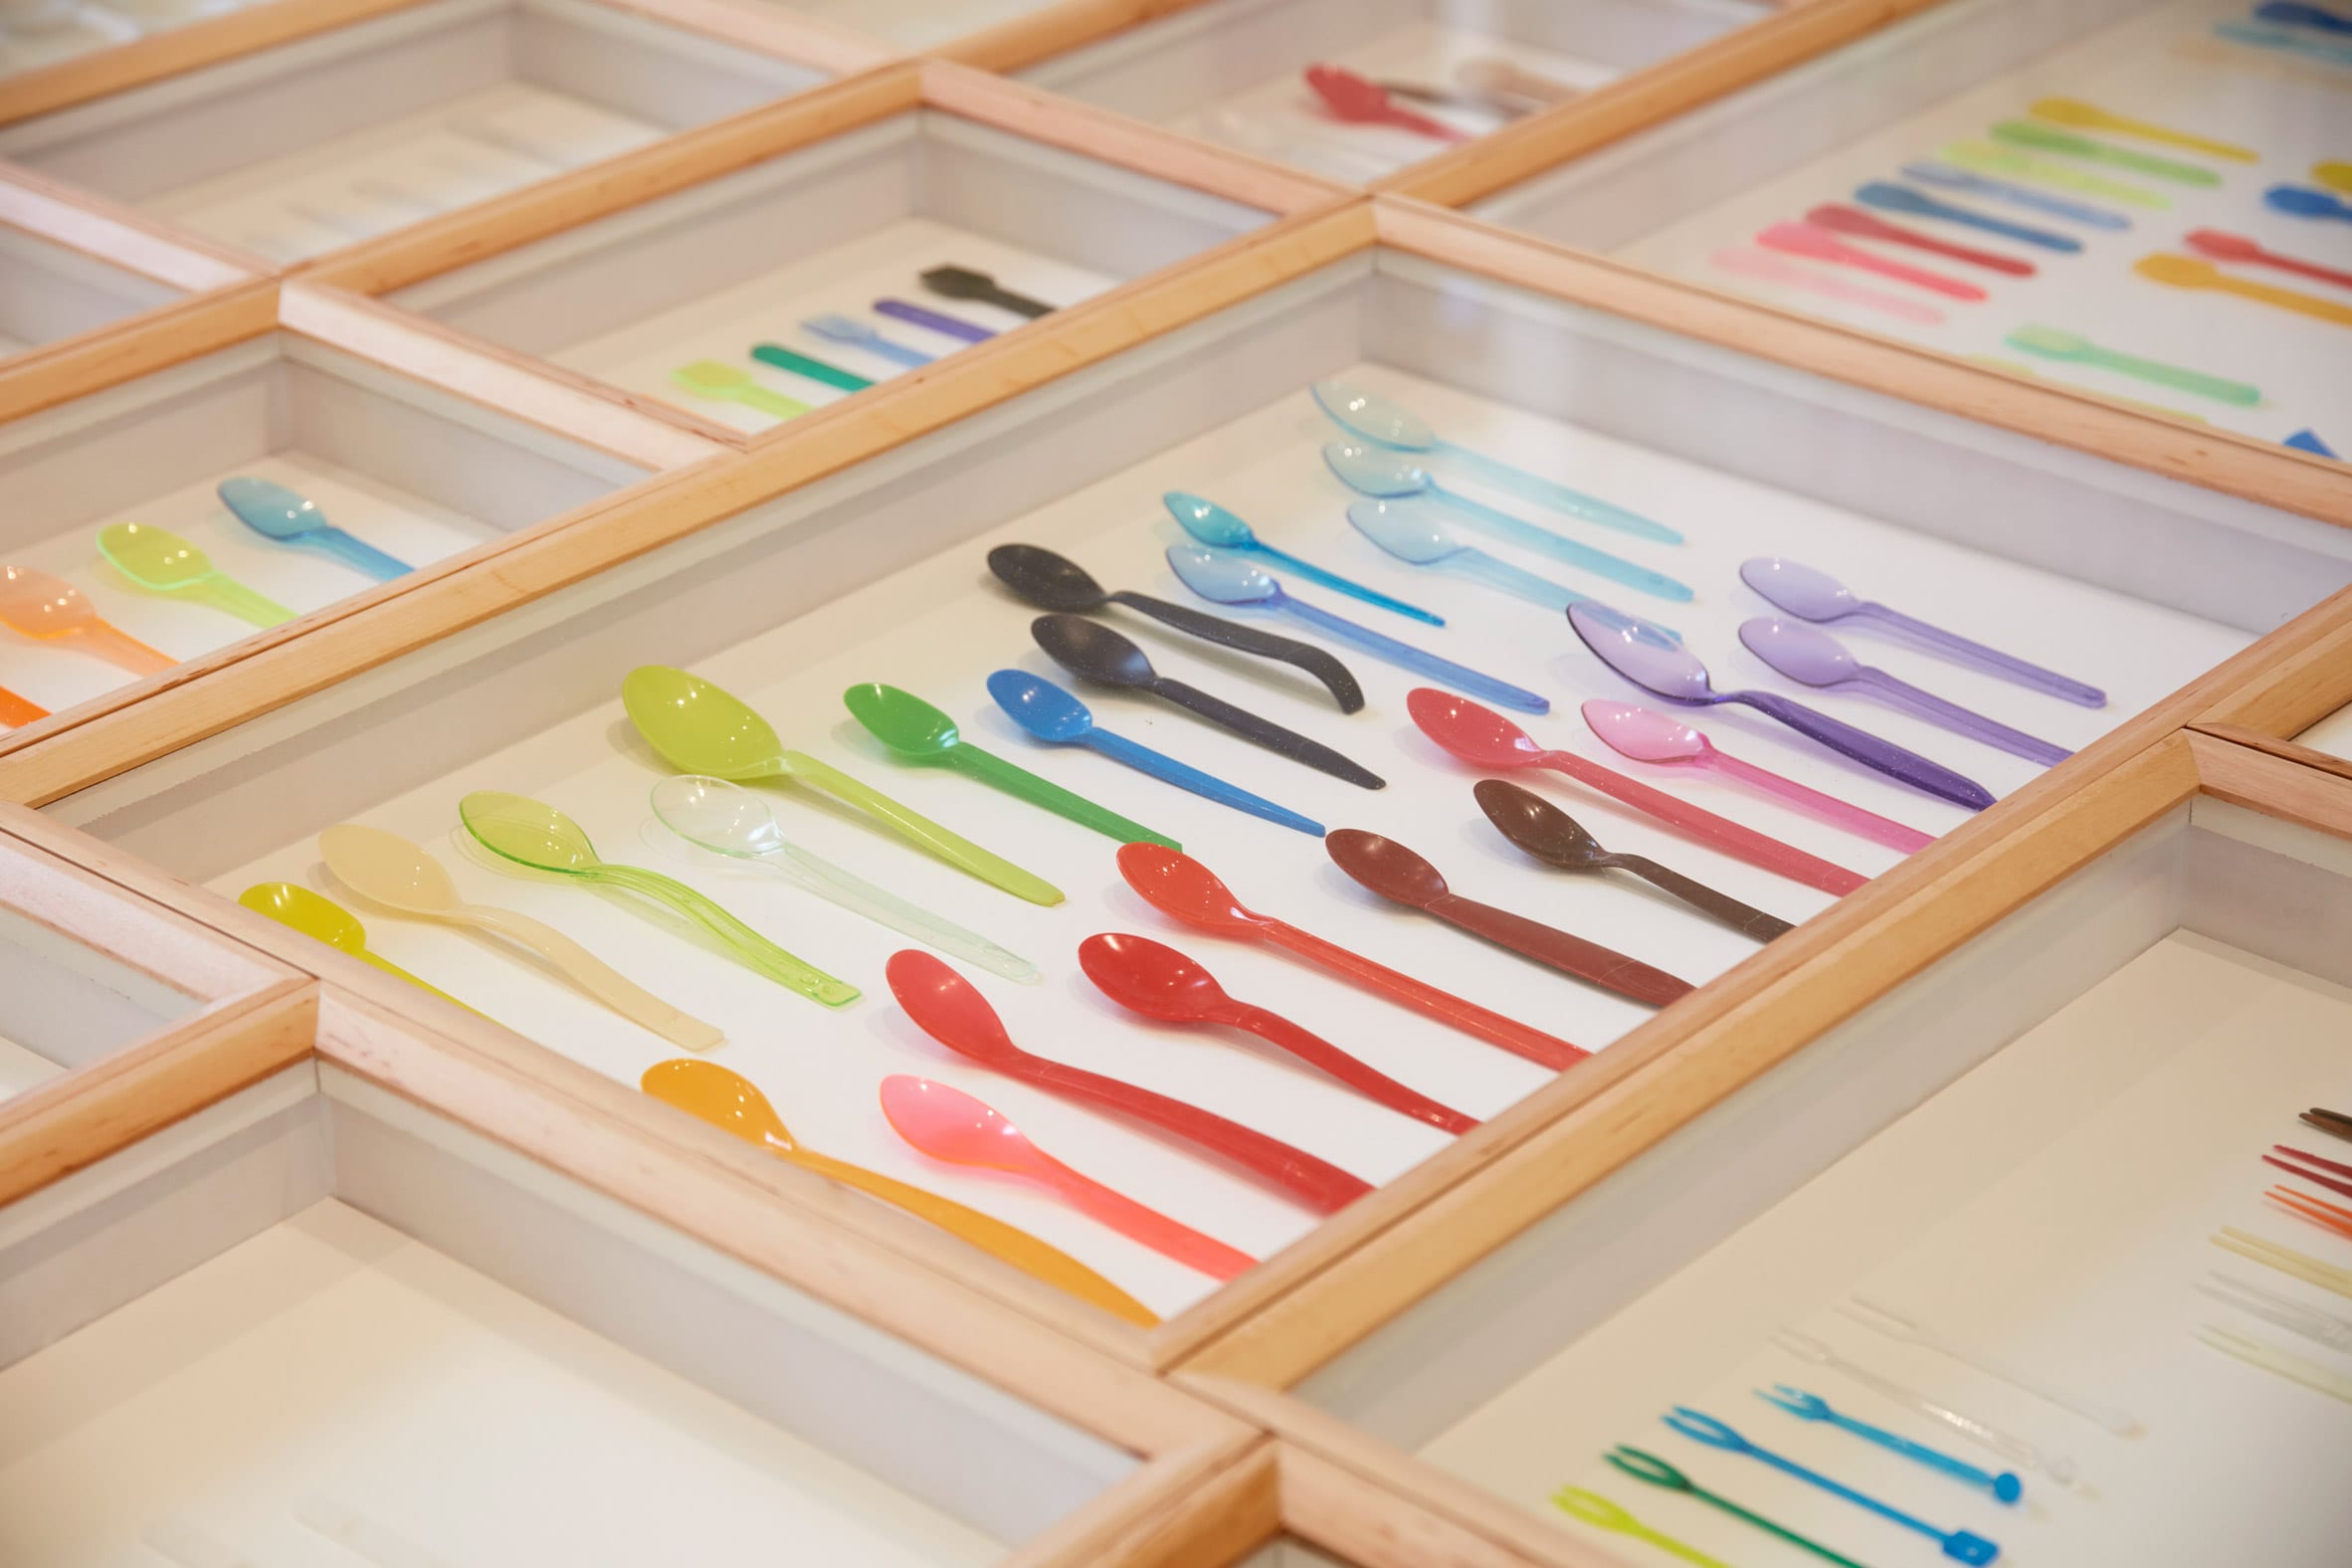 Spoons are organised in a case at Spoon Archaeology